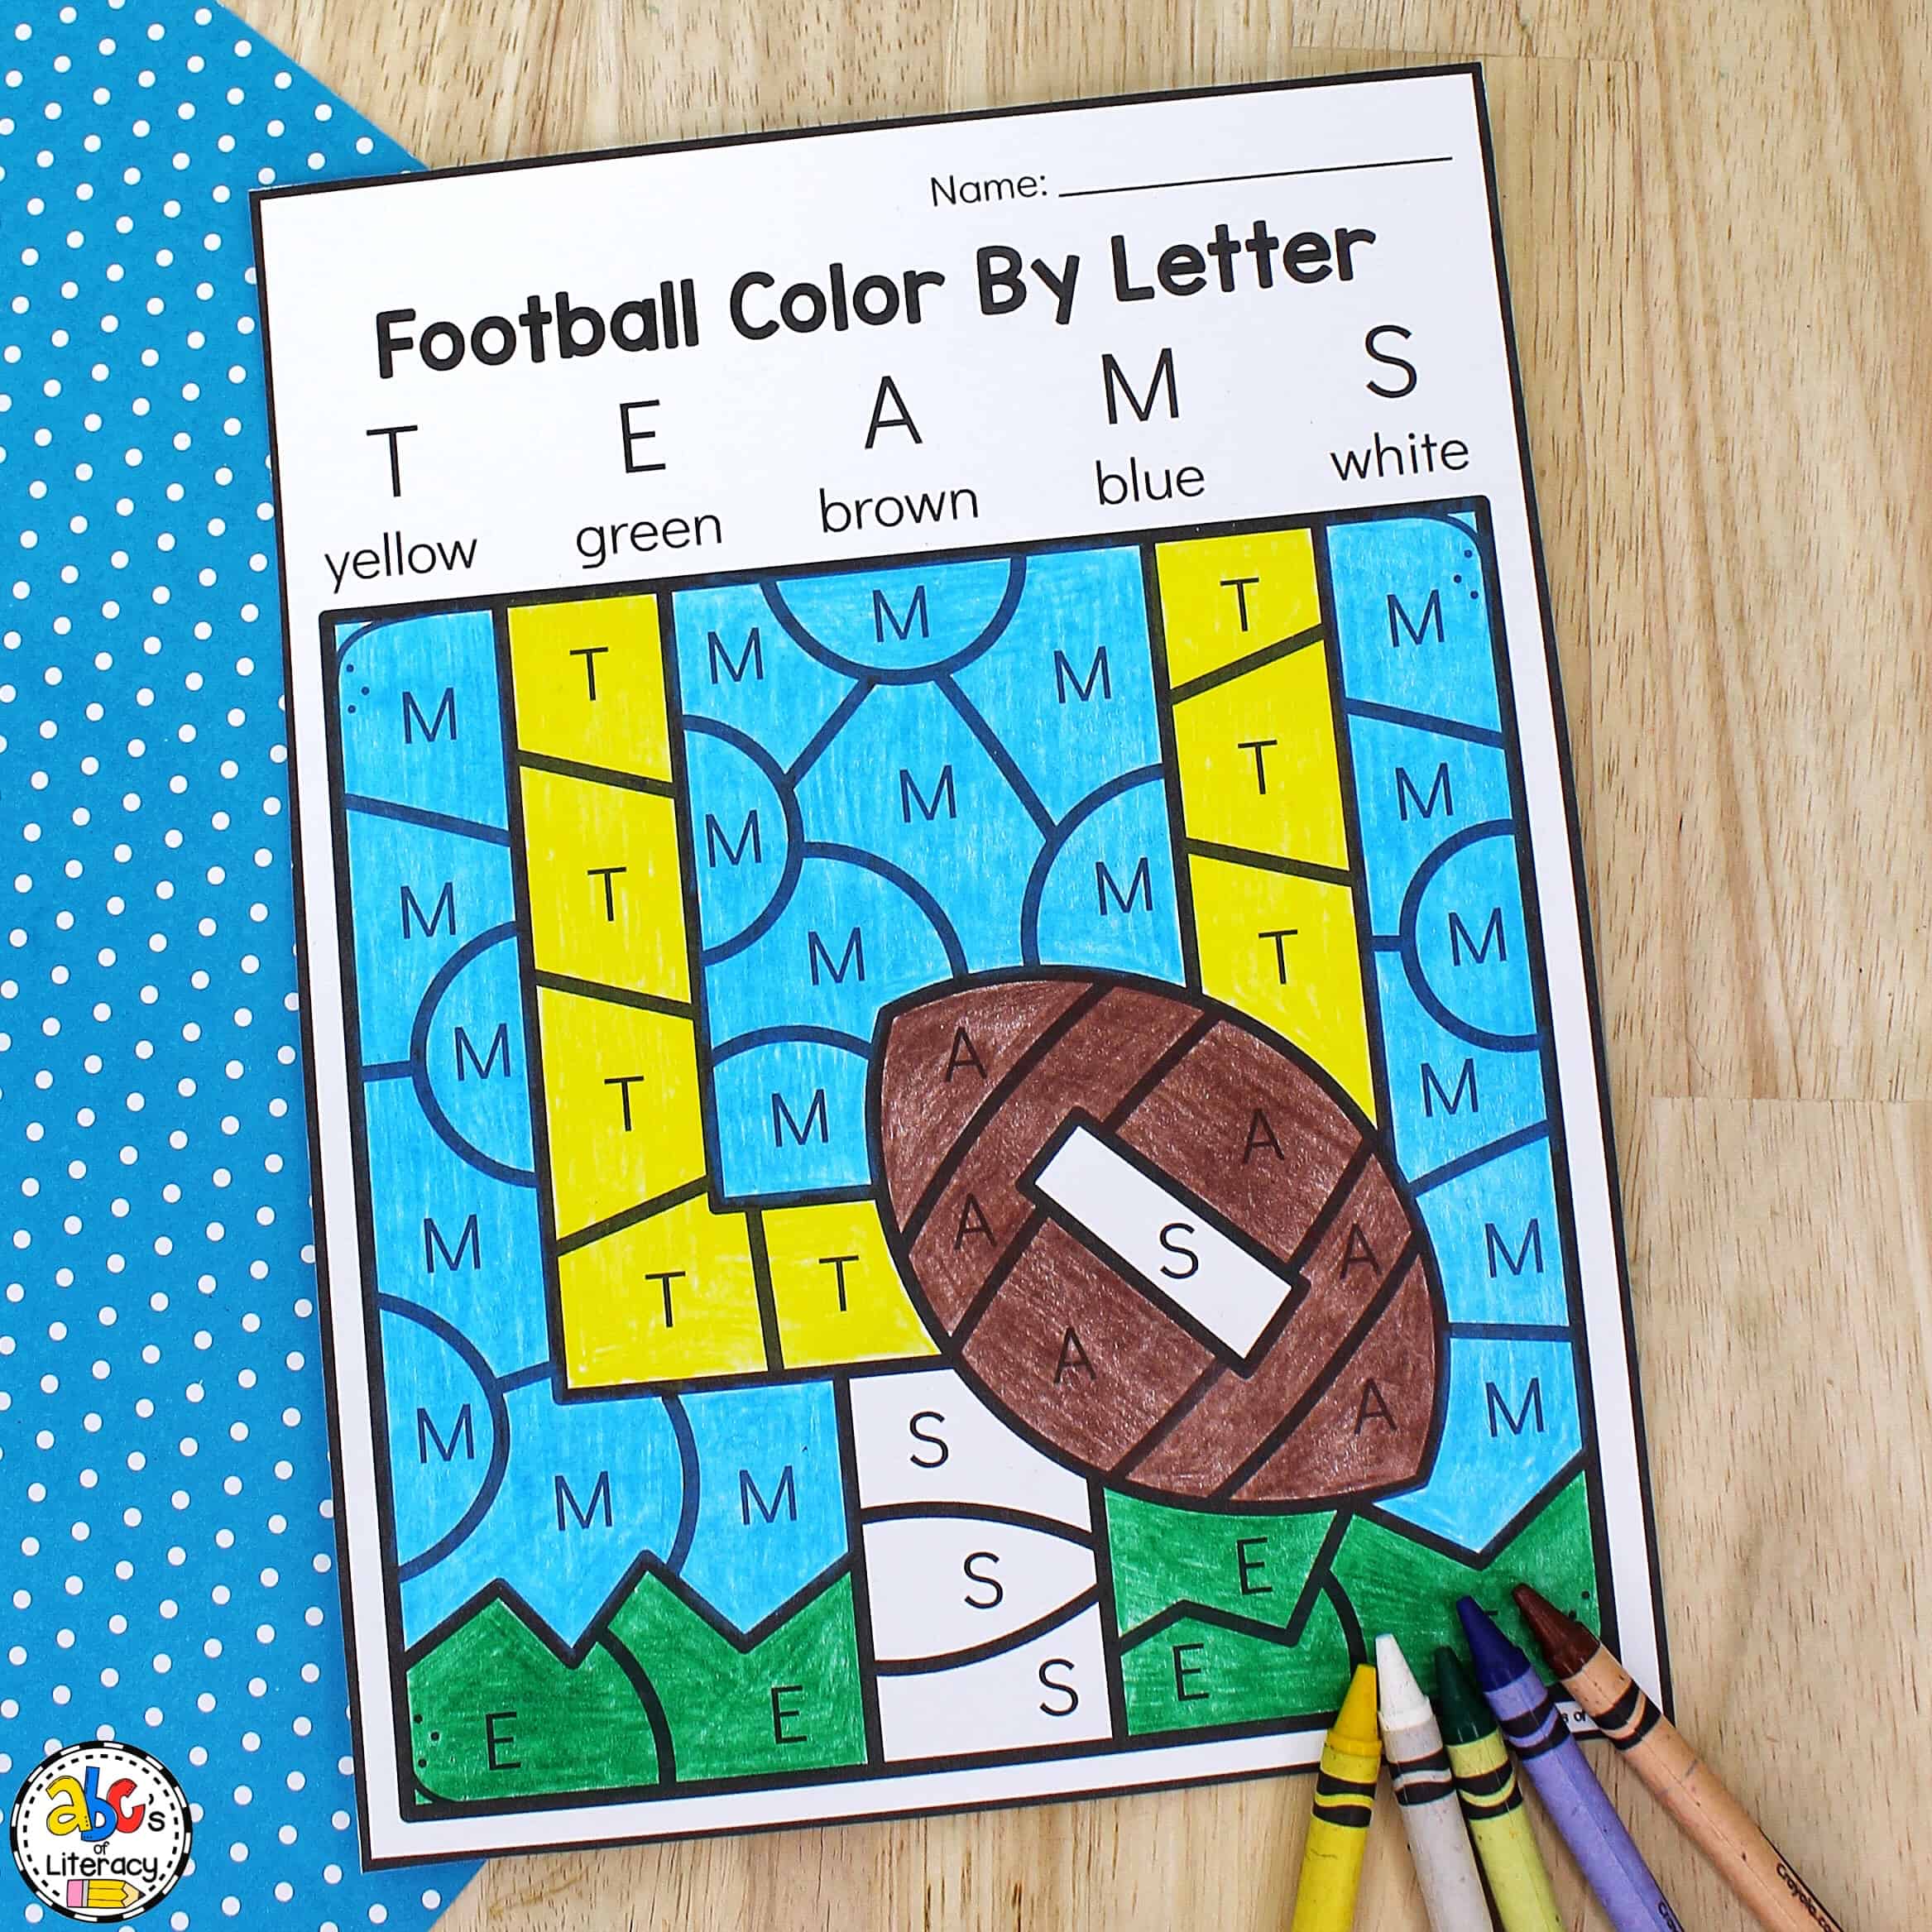 Football color by letter worksheets